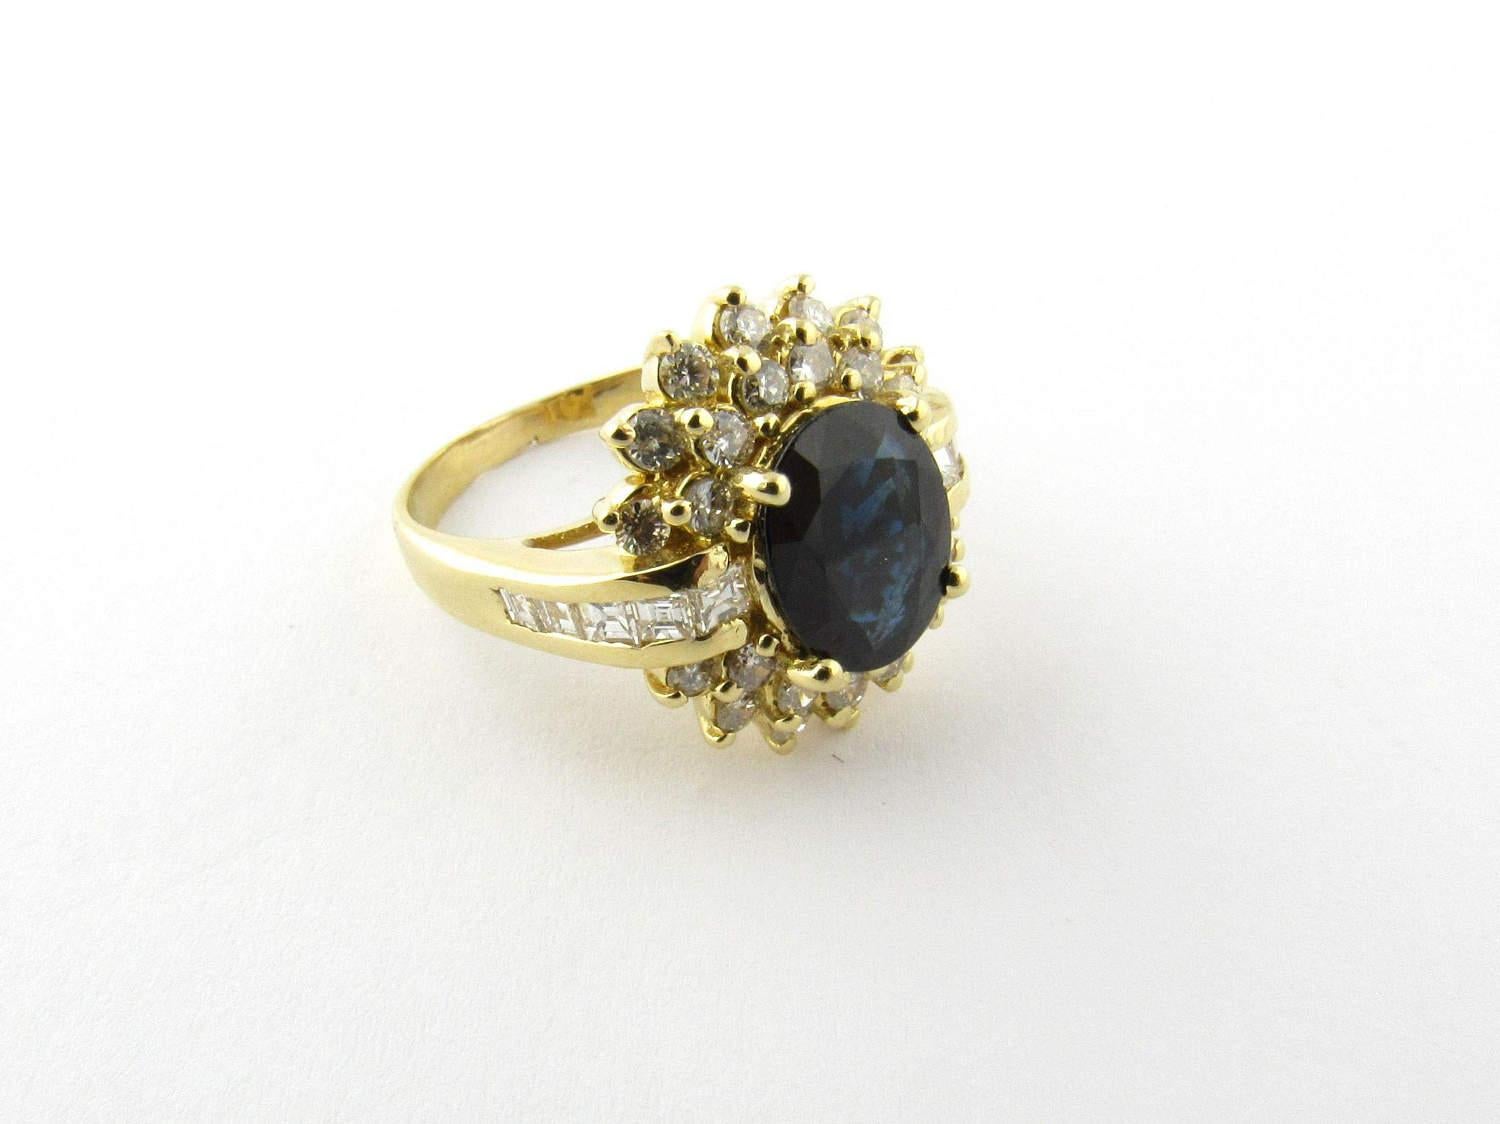 Vintage 14K Yellow Gold Oval Sapphire and Diamond Ring Size 6 

This large sapphire and diamond ring is sure to catch the eye. 

The center genuine sapphire is a deep blue and measures approximately 8mm x 10 mm 

The sapphire is framed by 10